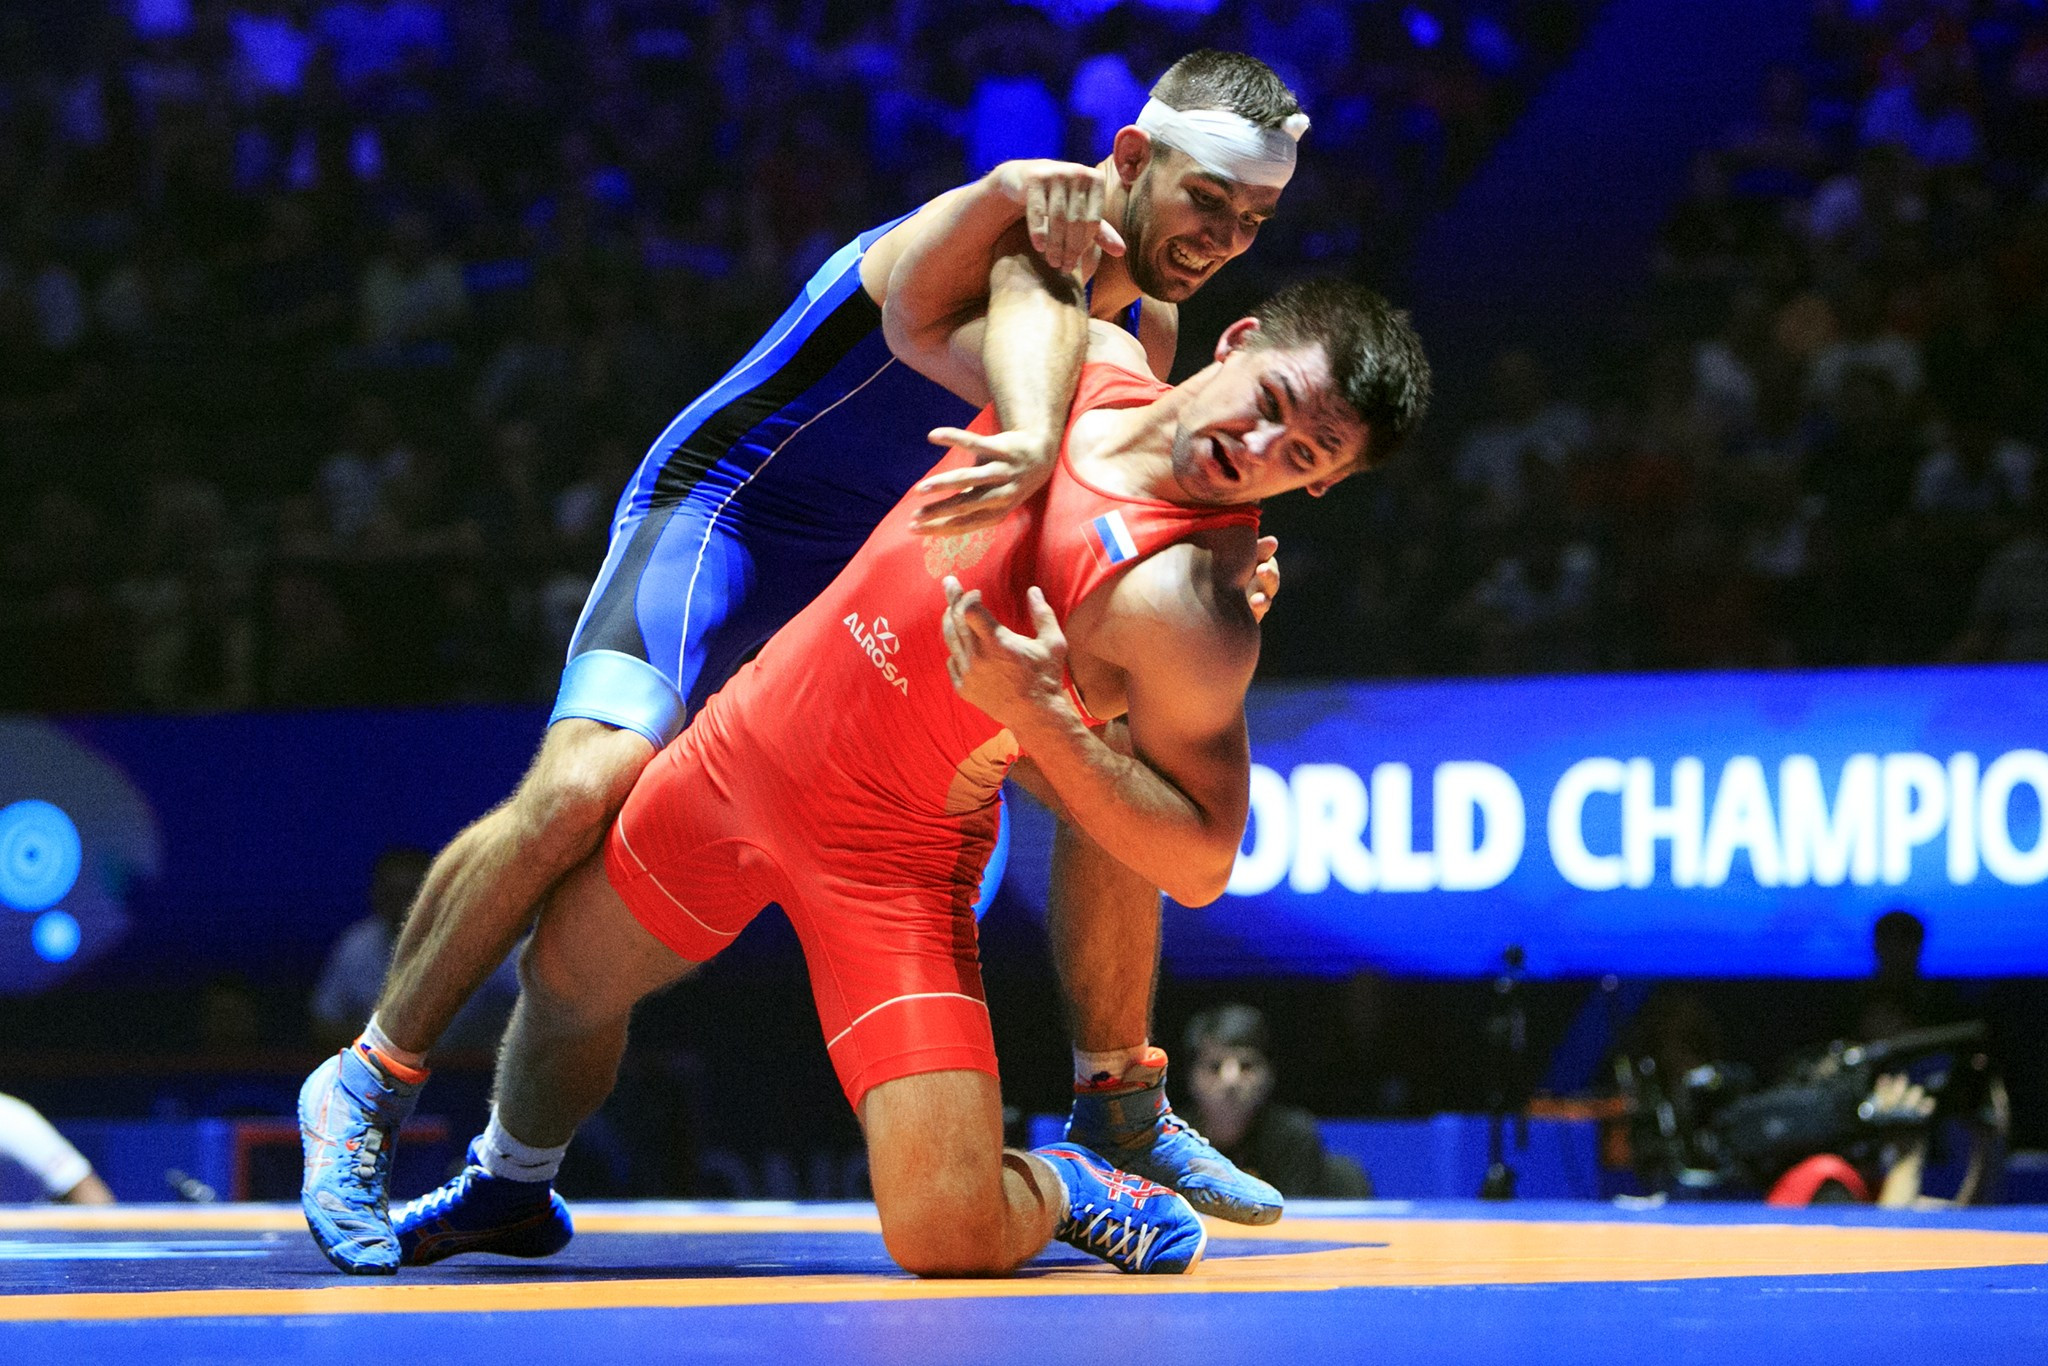 Viktor Nemes became Serbia's second world wrestling champion as he took gold in the 75kg category ©UWW